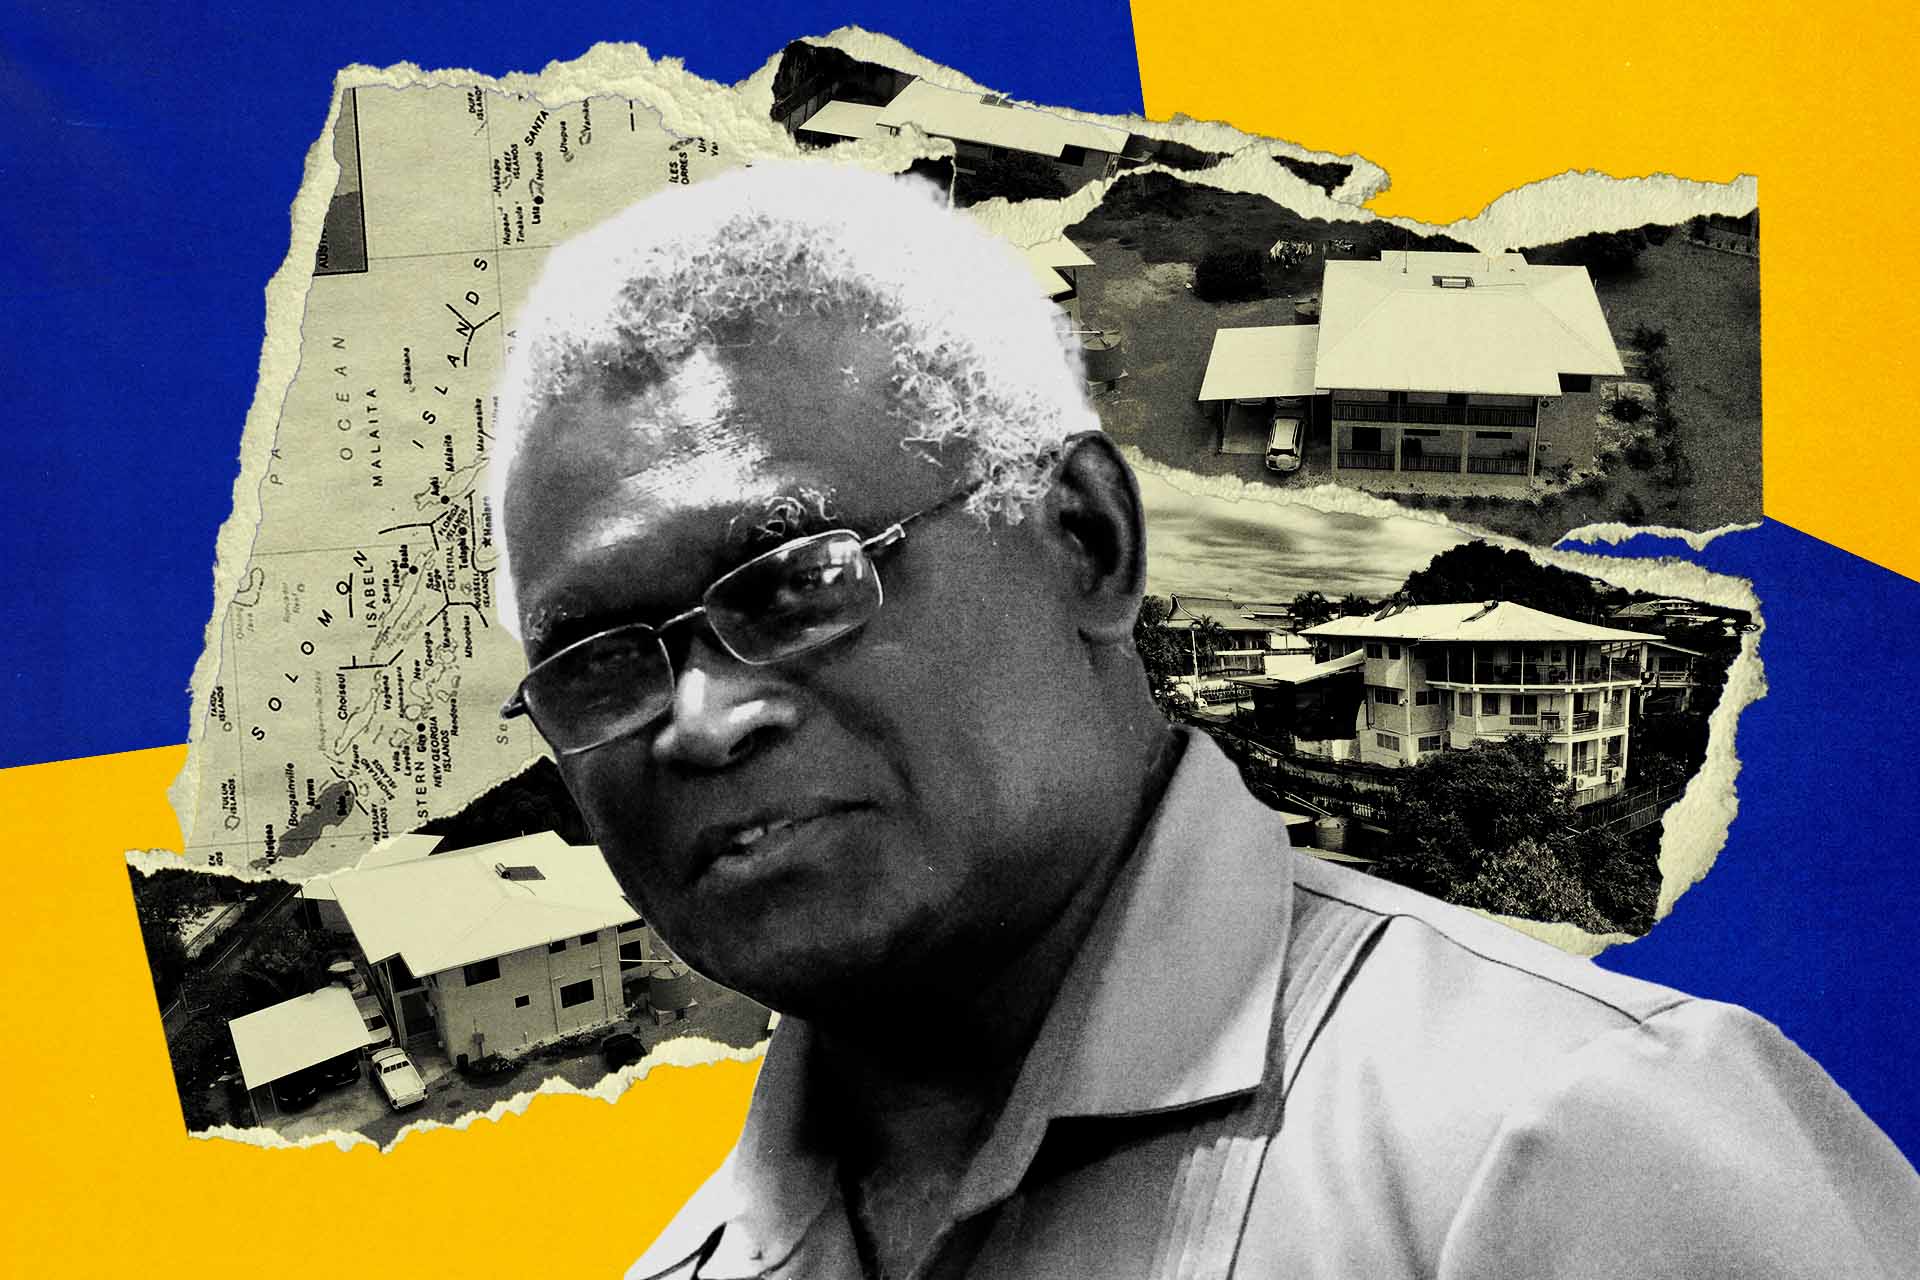 Solomon Islands PM Has Millions in Property, Raising Questions Around Wealth